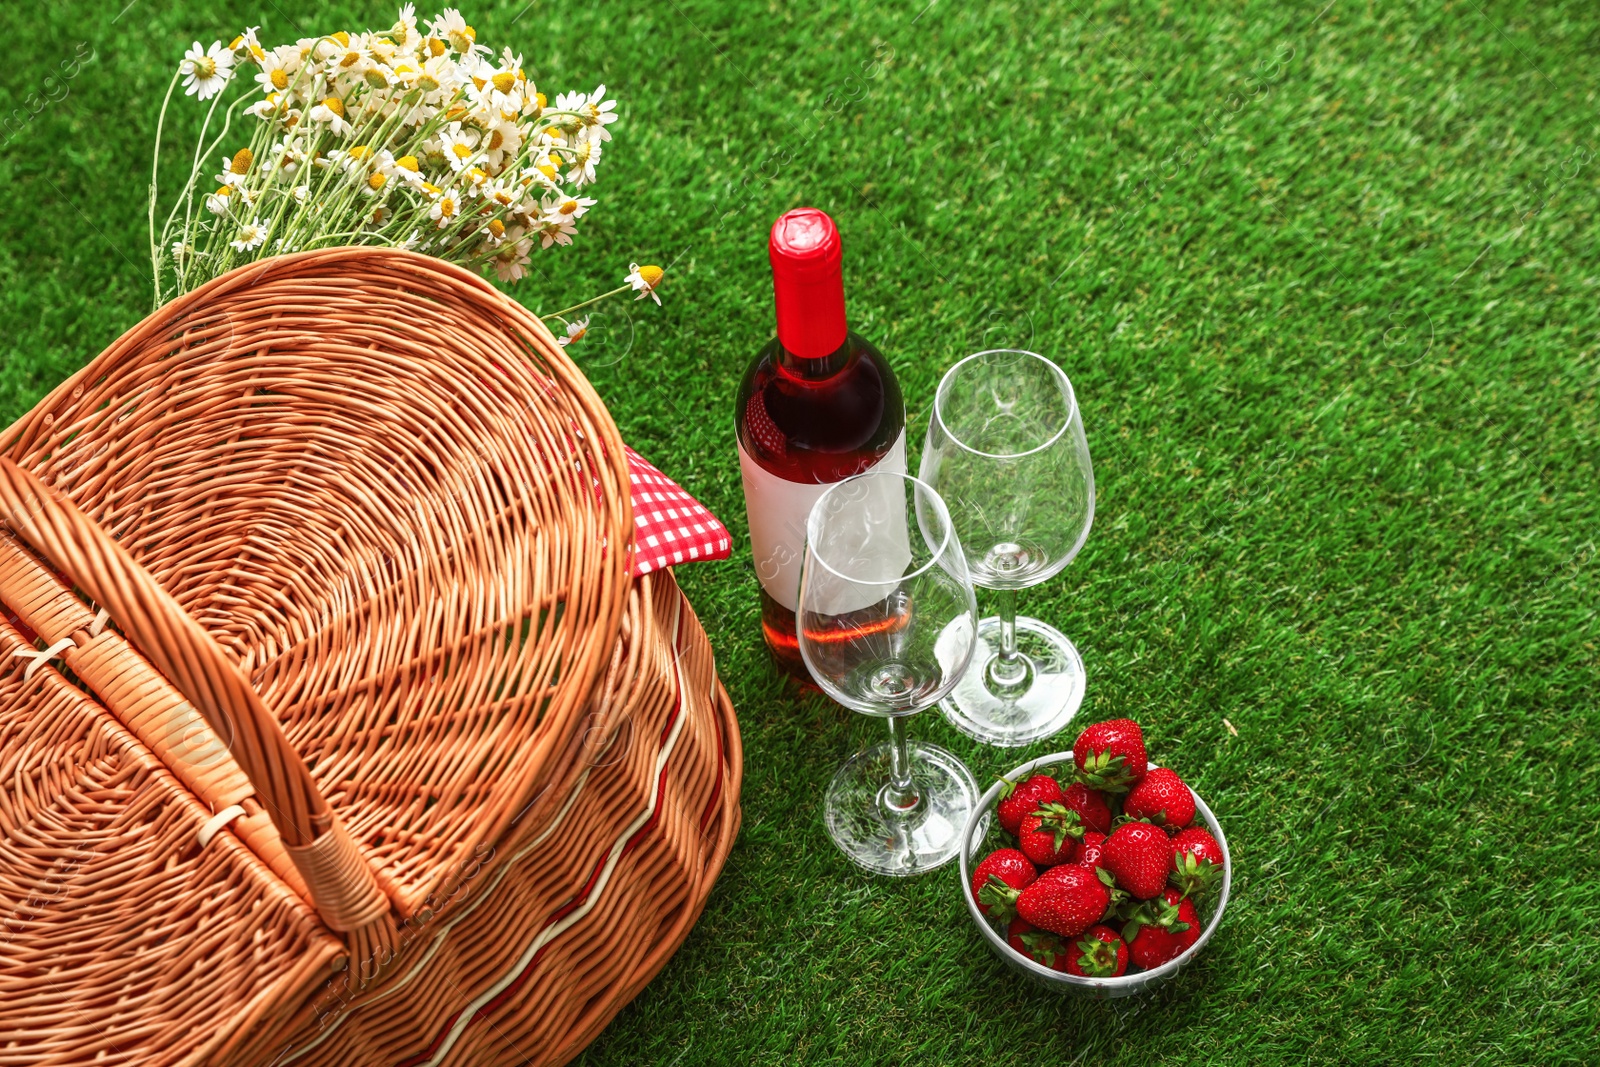 Photo of Picnic basket with wine and bowl of strawberries on grass